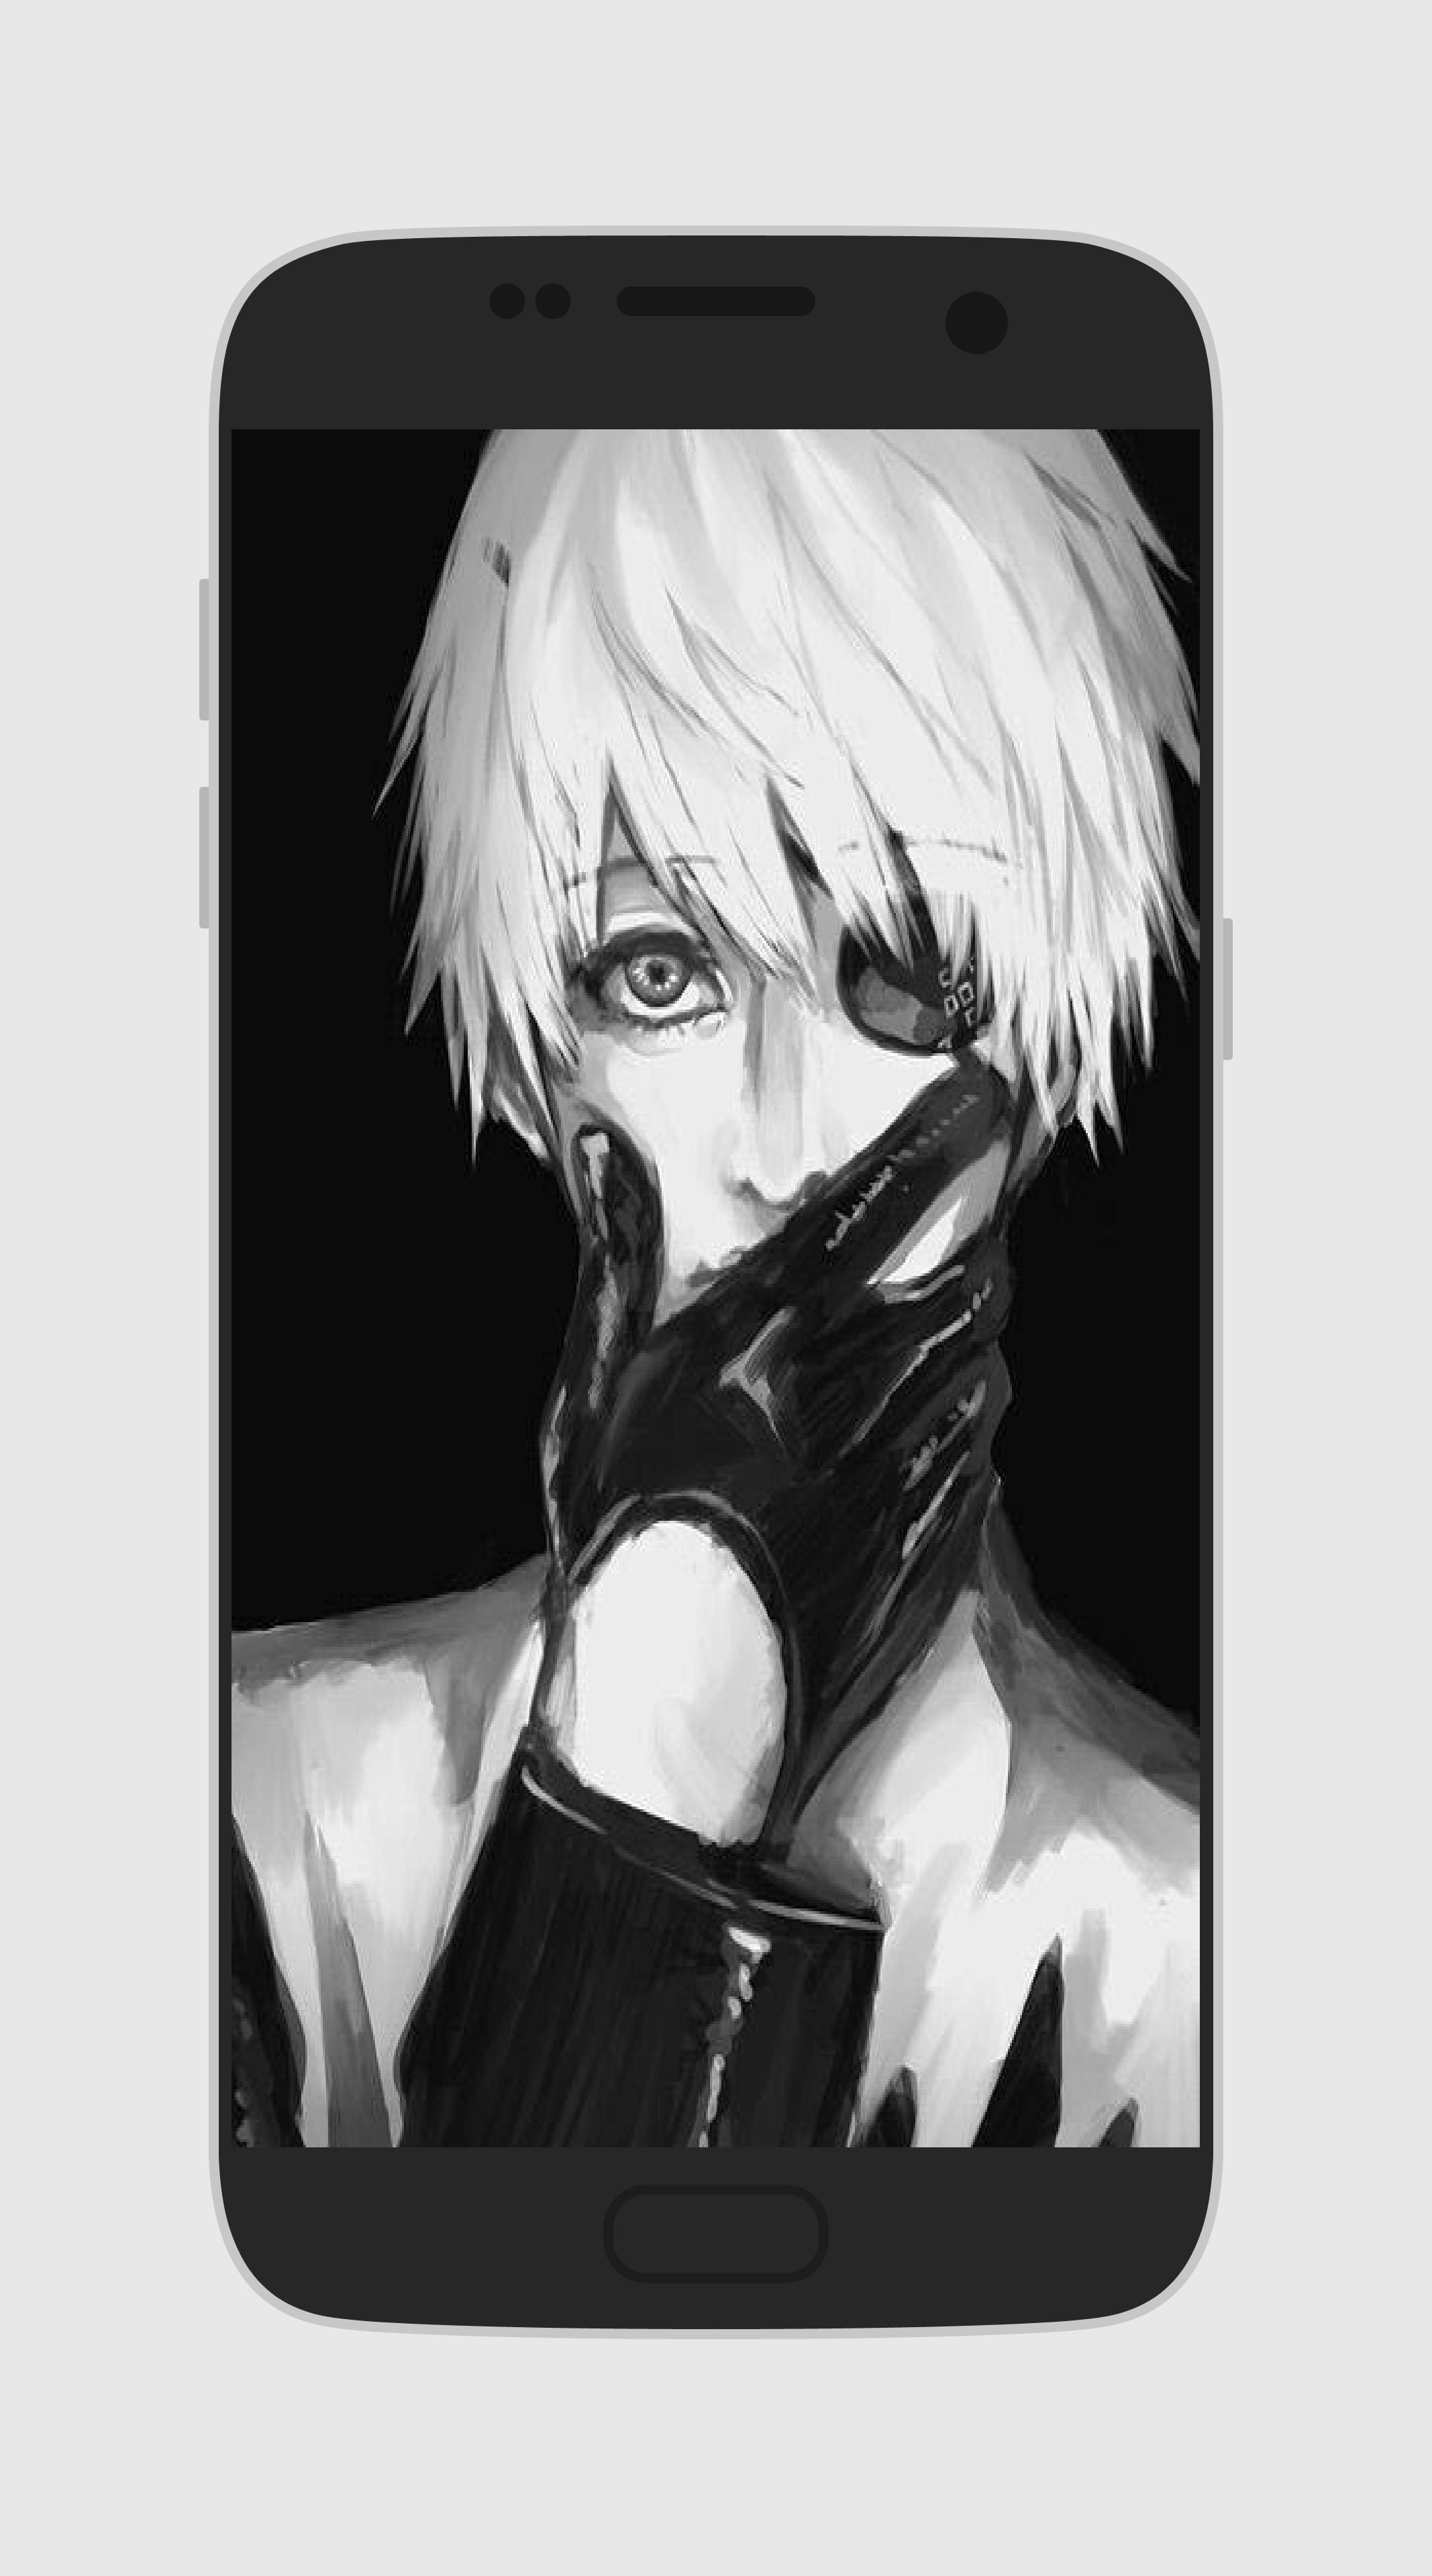 Tokyo Anime Ghoul Themes For Android Apk Download - tokyo ghost kaneki roblox amino